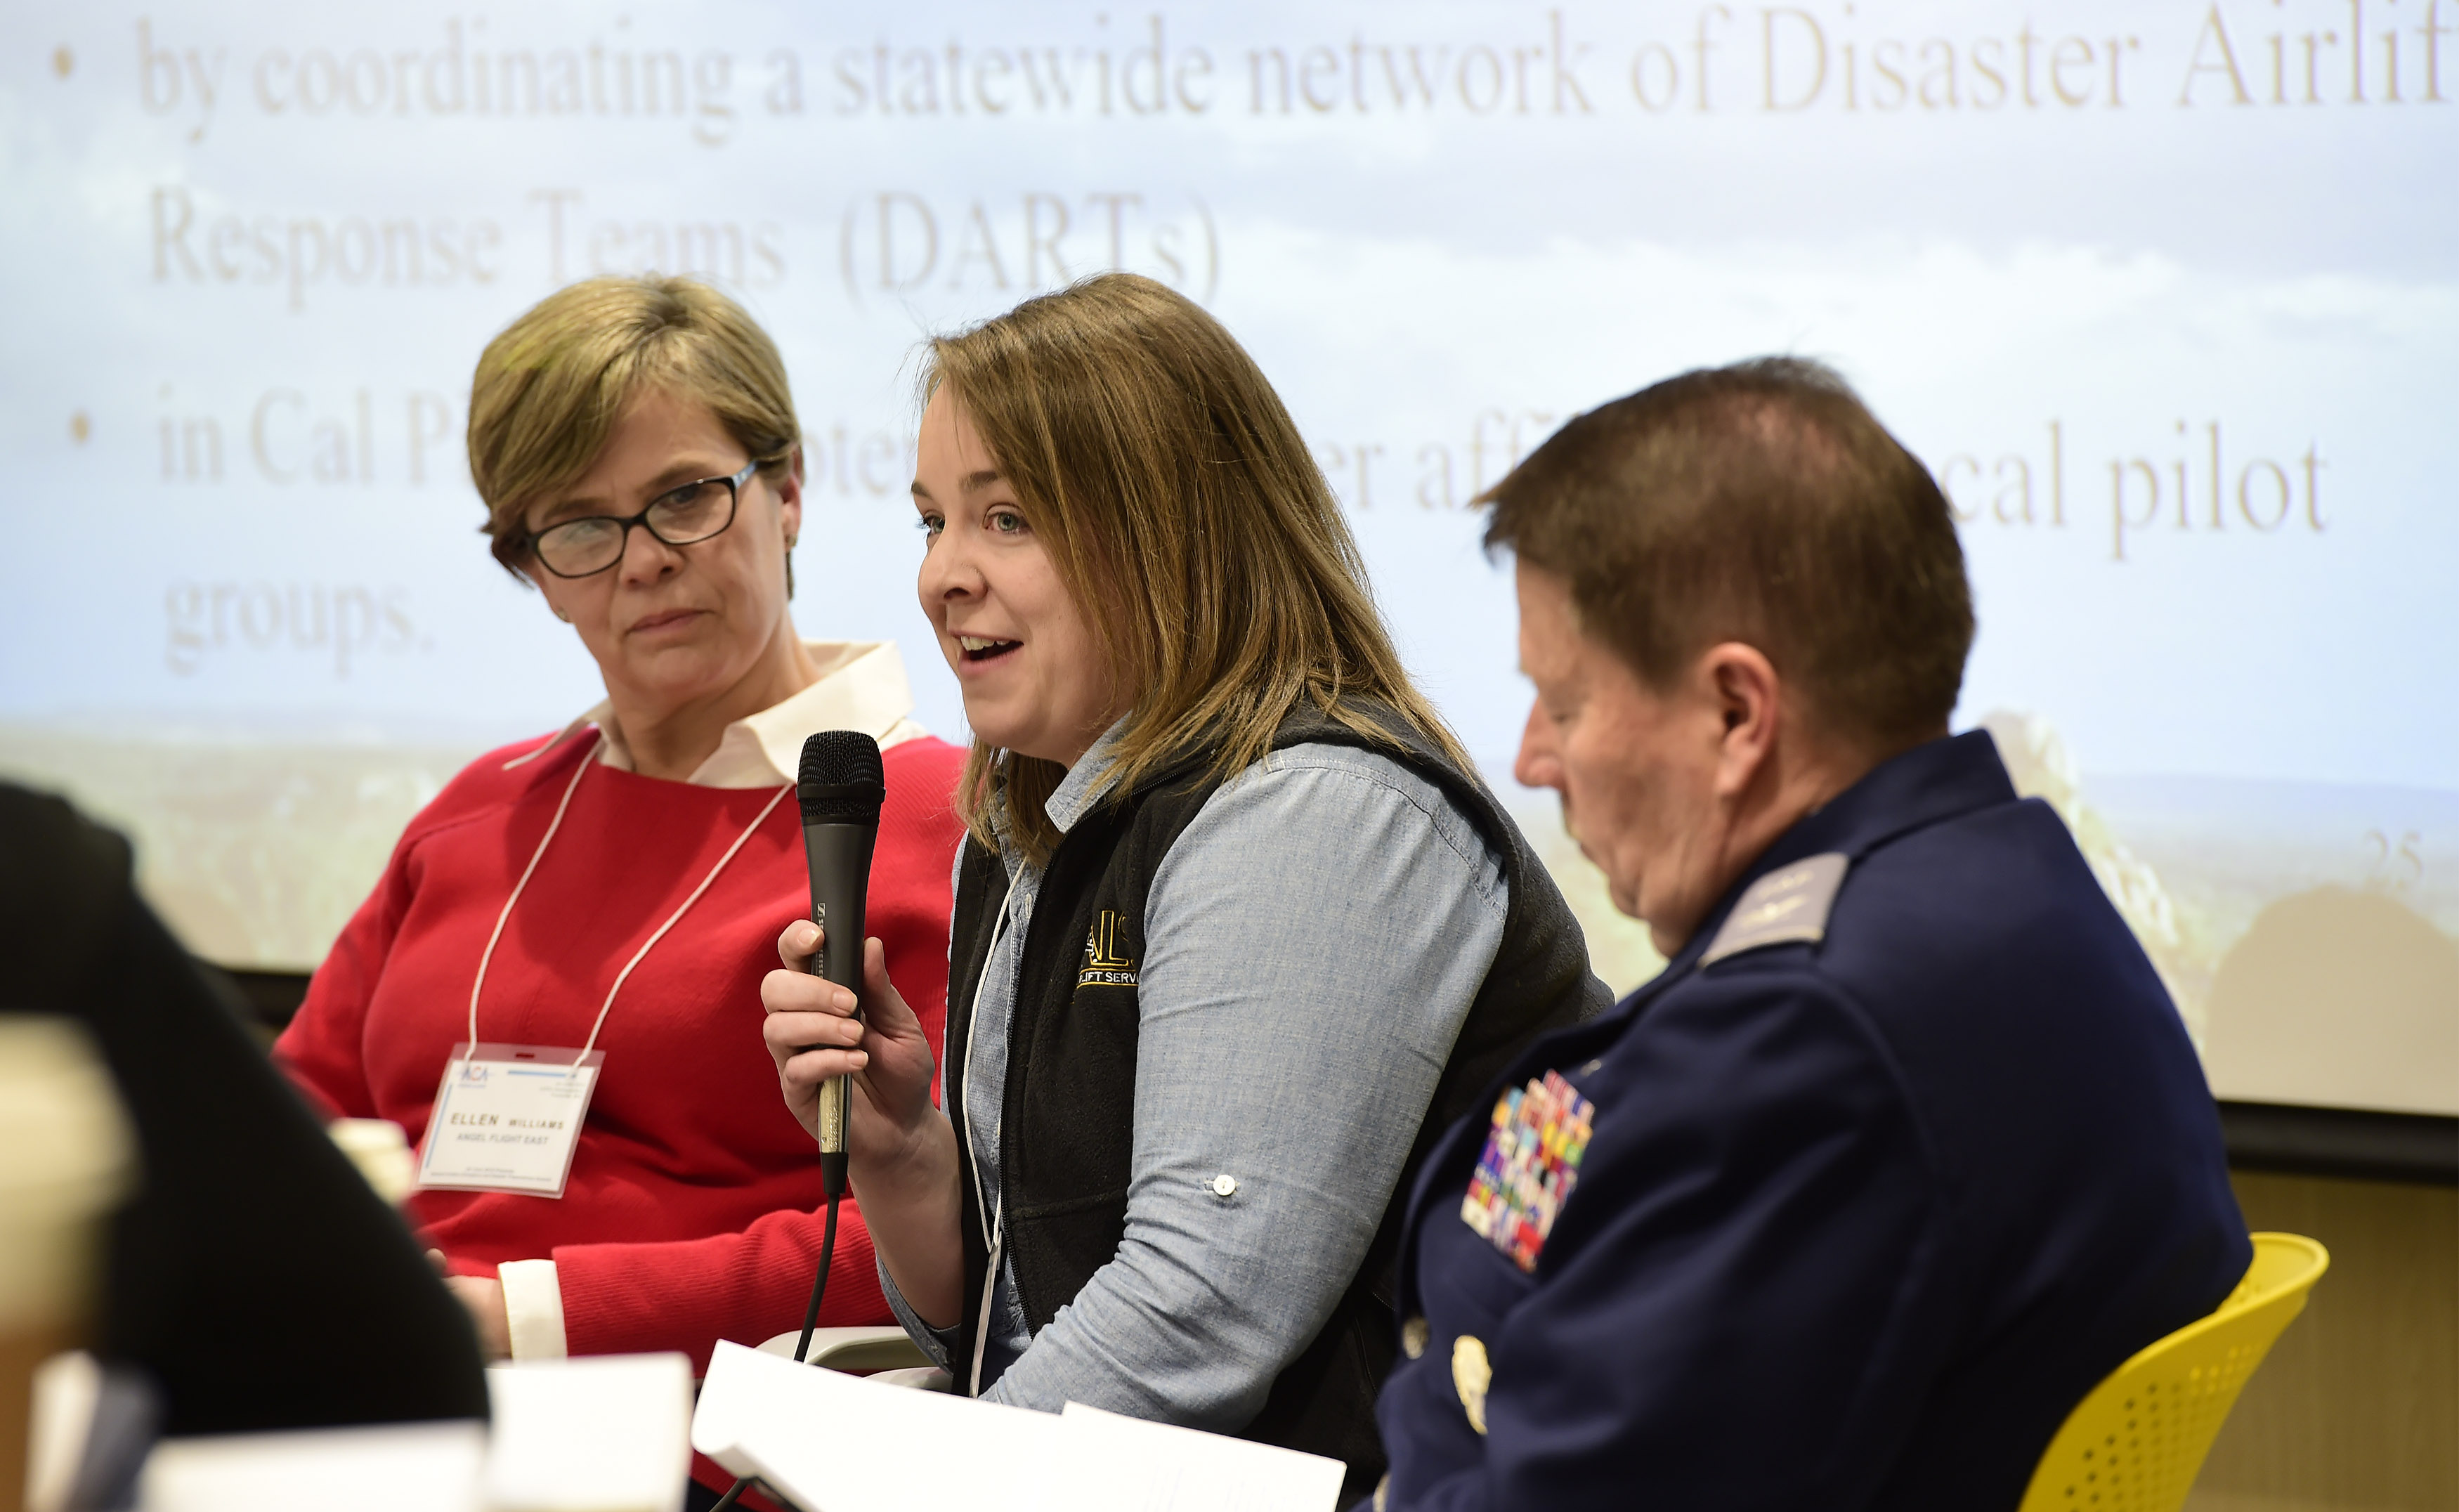 Air Care Alliance member and Patient AirLift Services Pilot Coordinator Jen Hotsko attends Air Care 2018, a general aviation emergency and disaster preparedness summit at the AOPA You Can Fly campus in Frederick, Maryland, April 20, 2018. Photo by David Tulis.